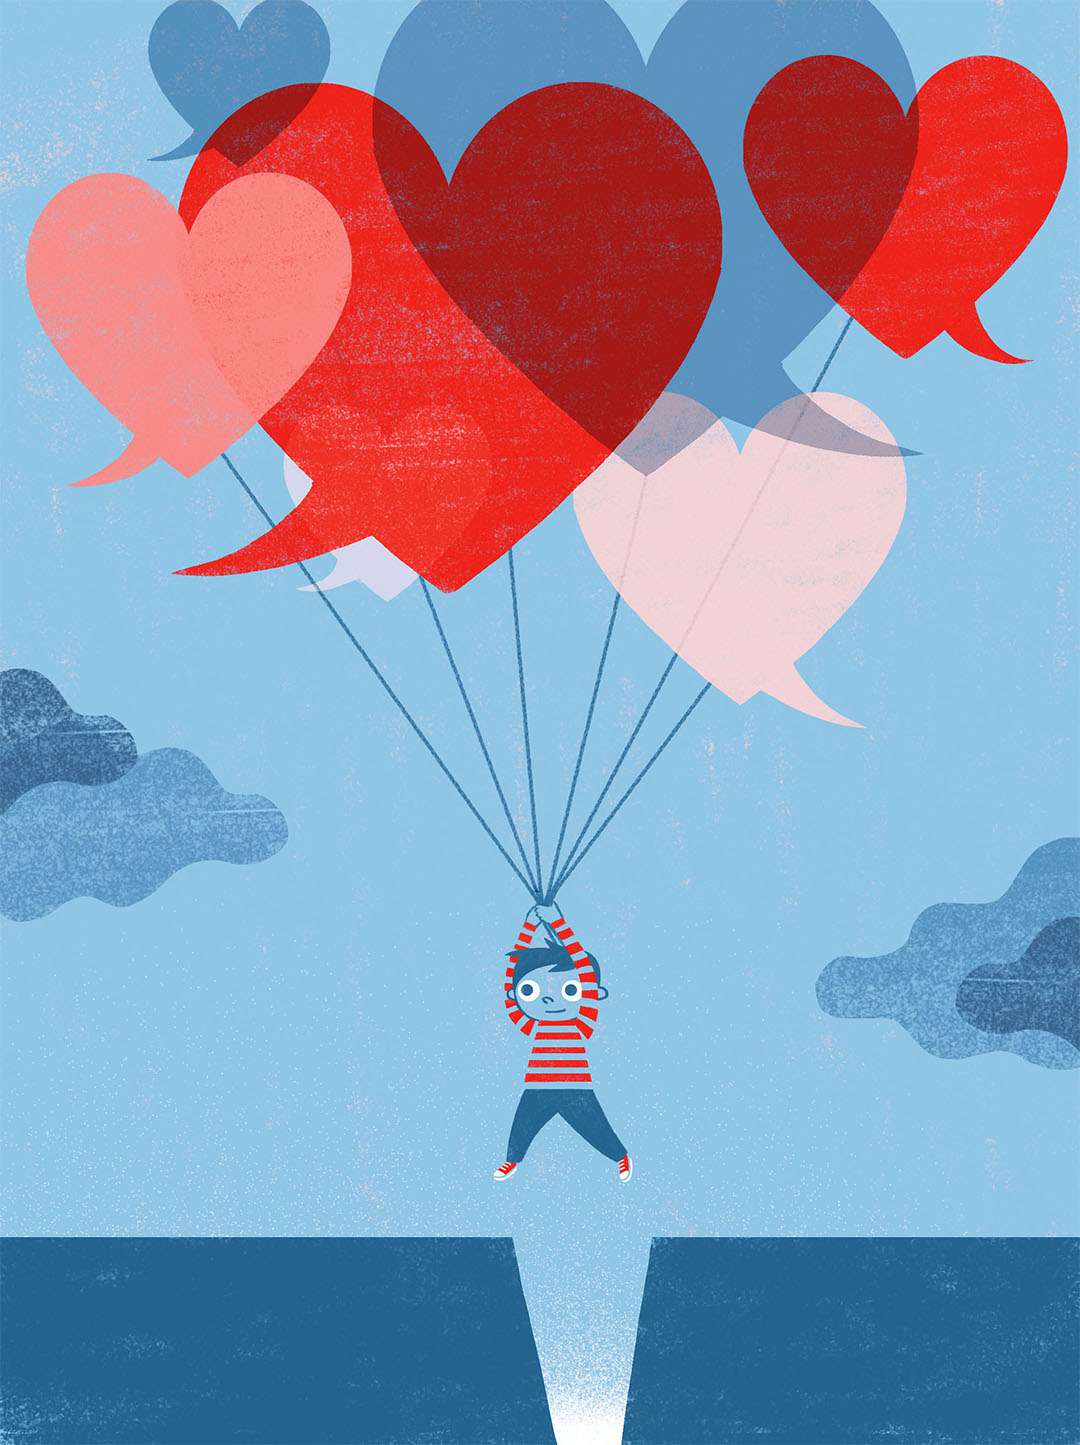 illustration of a boy floating and holding onto heart-shaped balloons